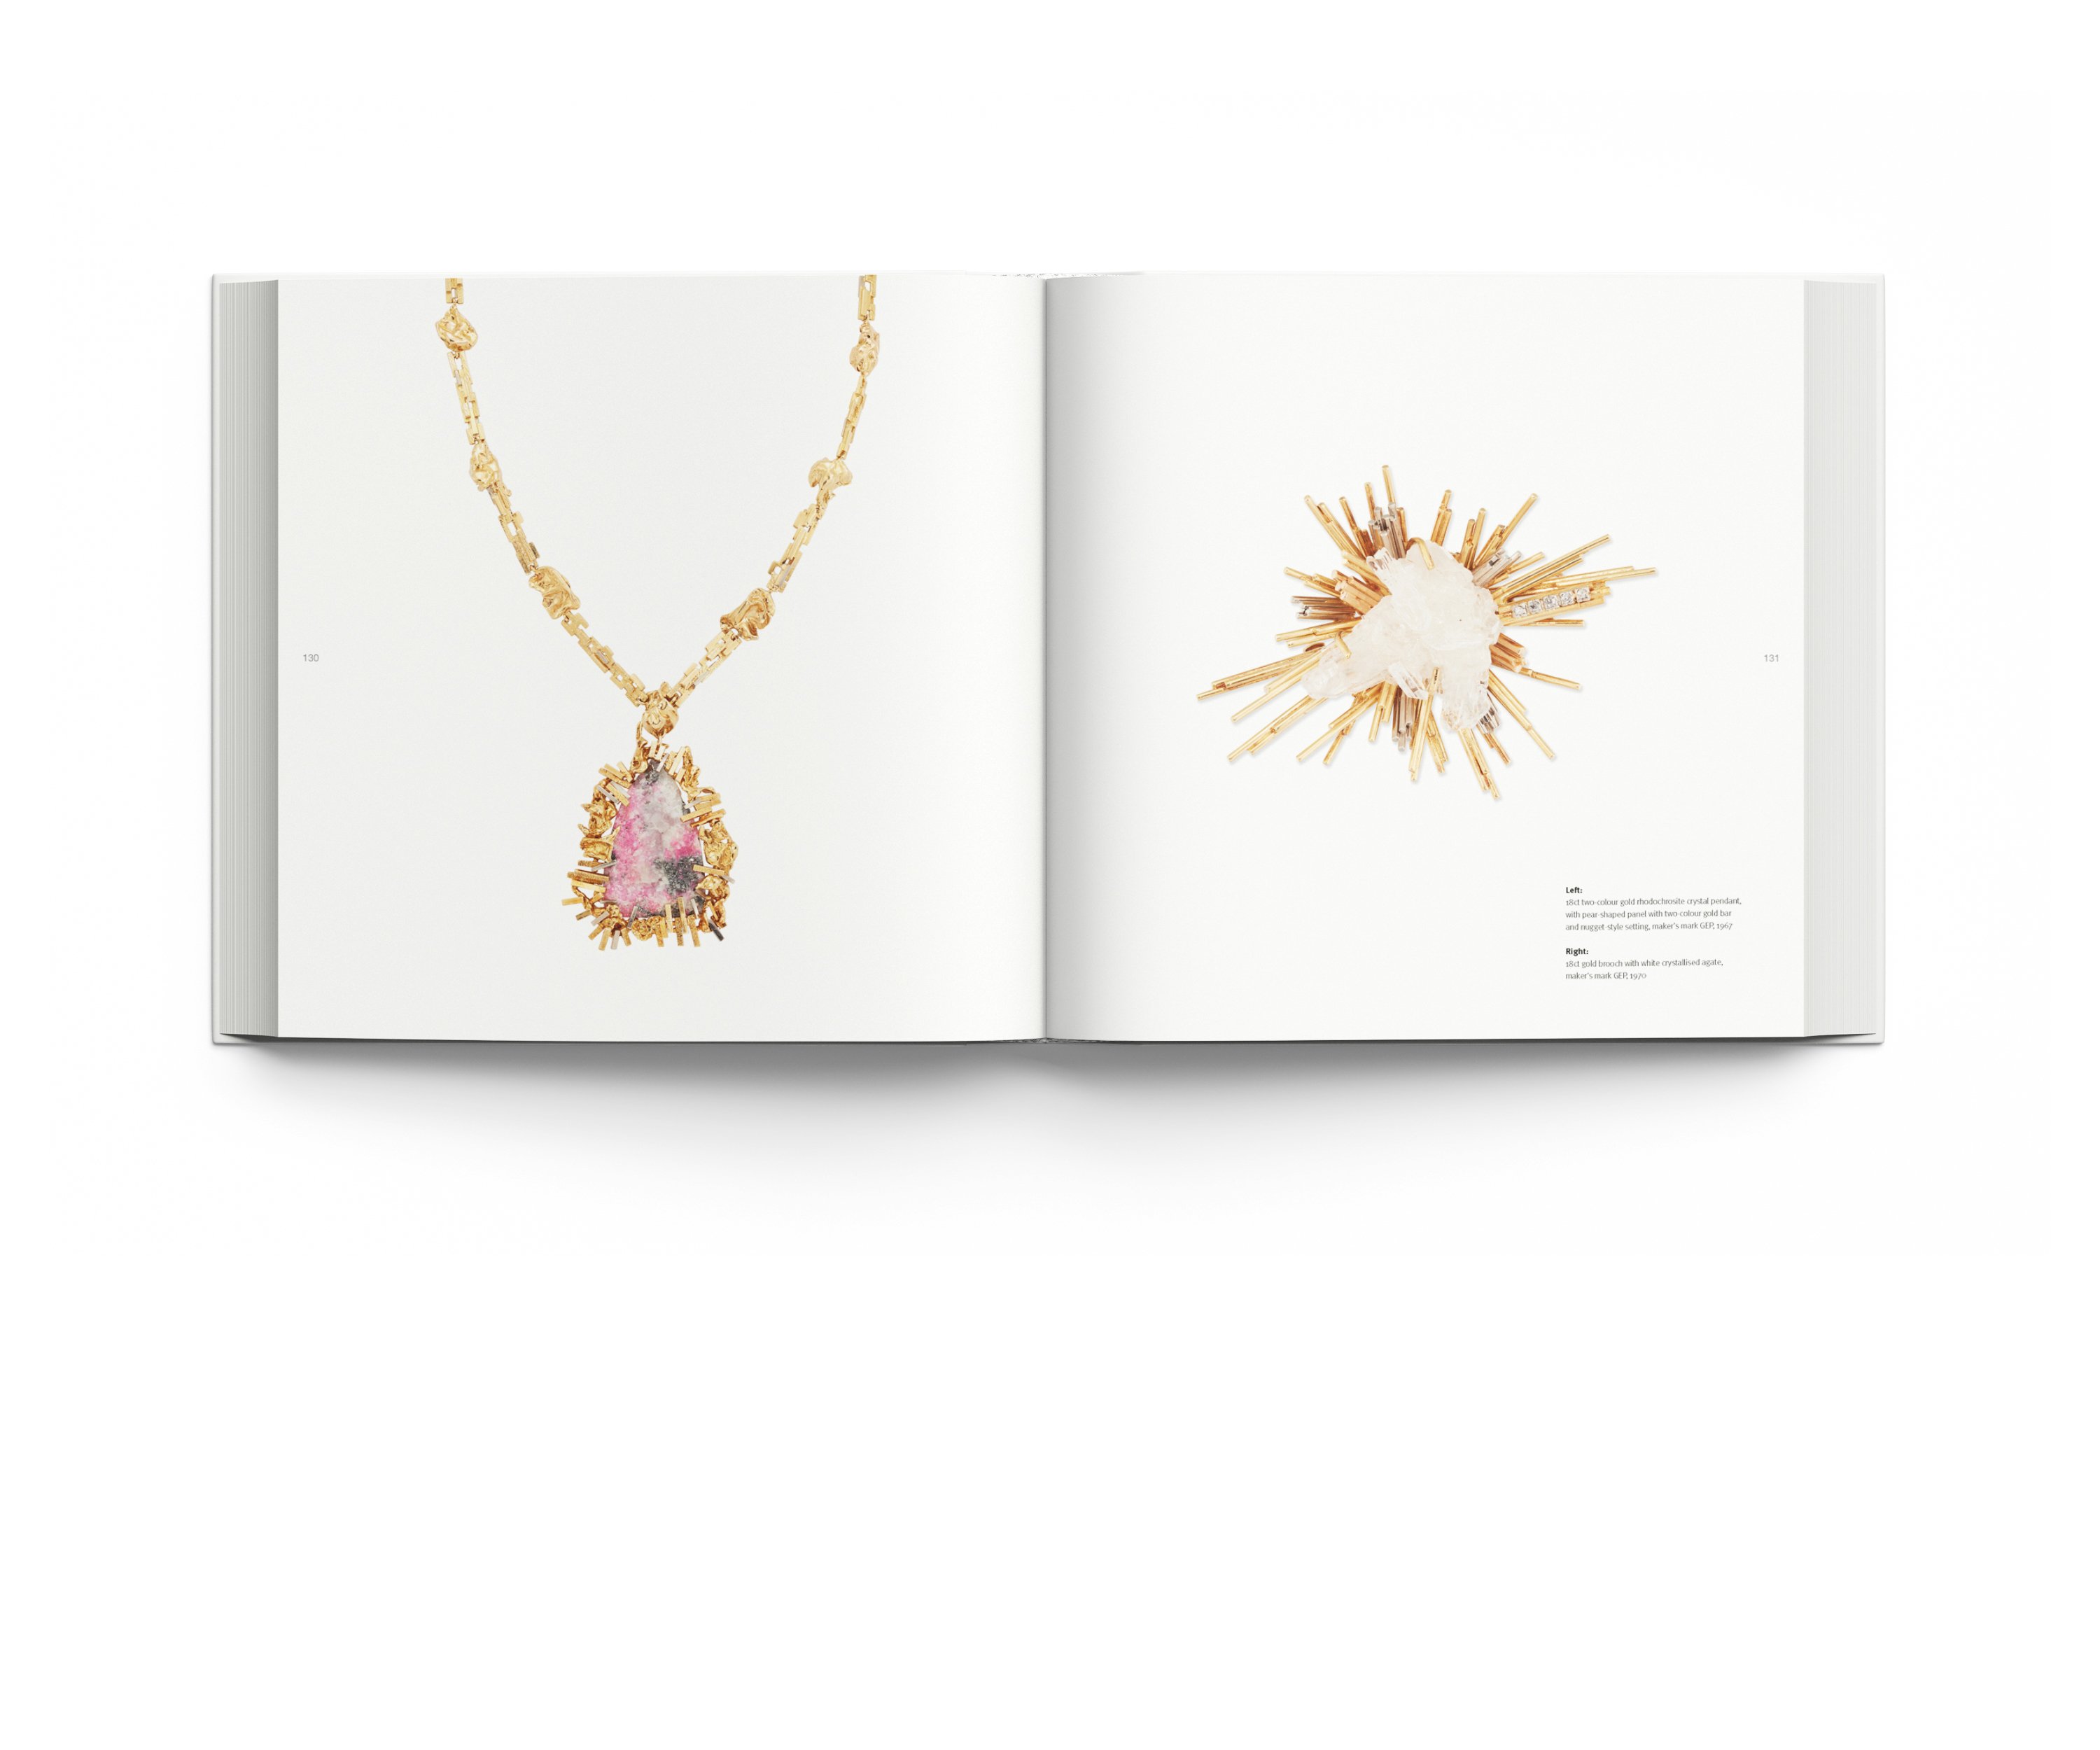 Gold necklace with diamond and amber jewels, on white cover, Modern British Jewellery Designers 1960-1980 in grey font above.